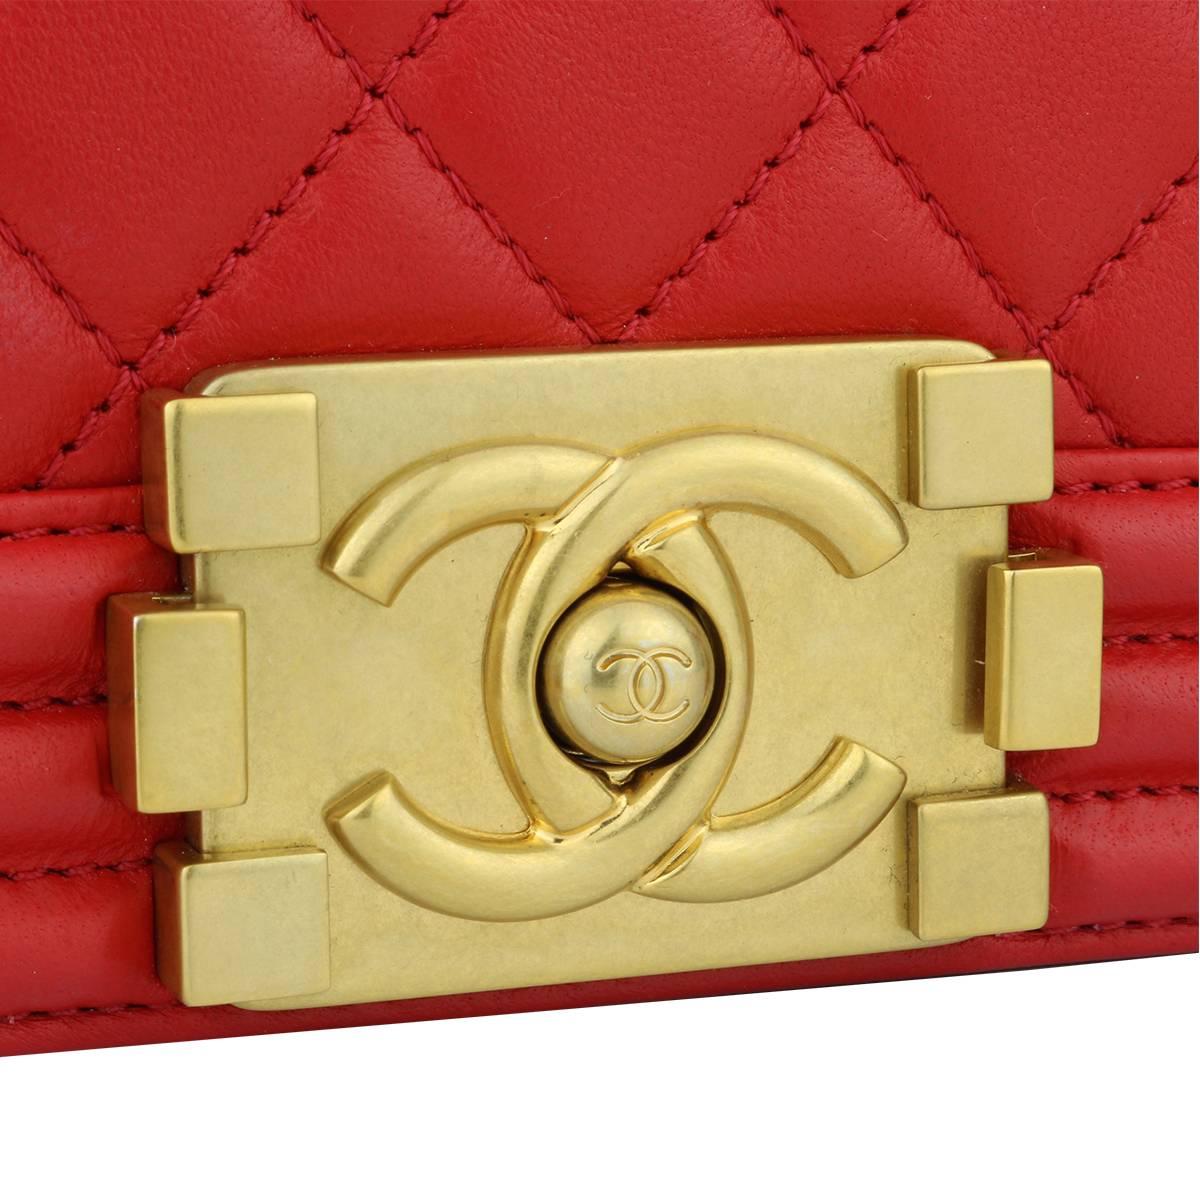 Authentic CHANEL Old Medium Quilted Boy Red Lambskin with Brushed Gold Hardware 2017.

This stunning bag is still in a mint condition, the bag still holds its original shape and the hardware is still very clean and shiny.

Exterior Condition: Mint